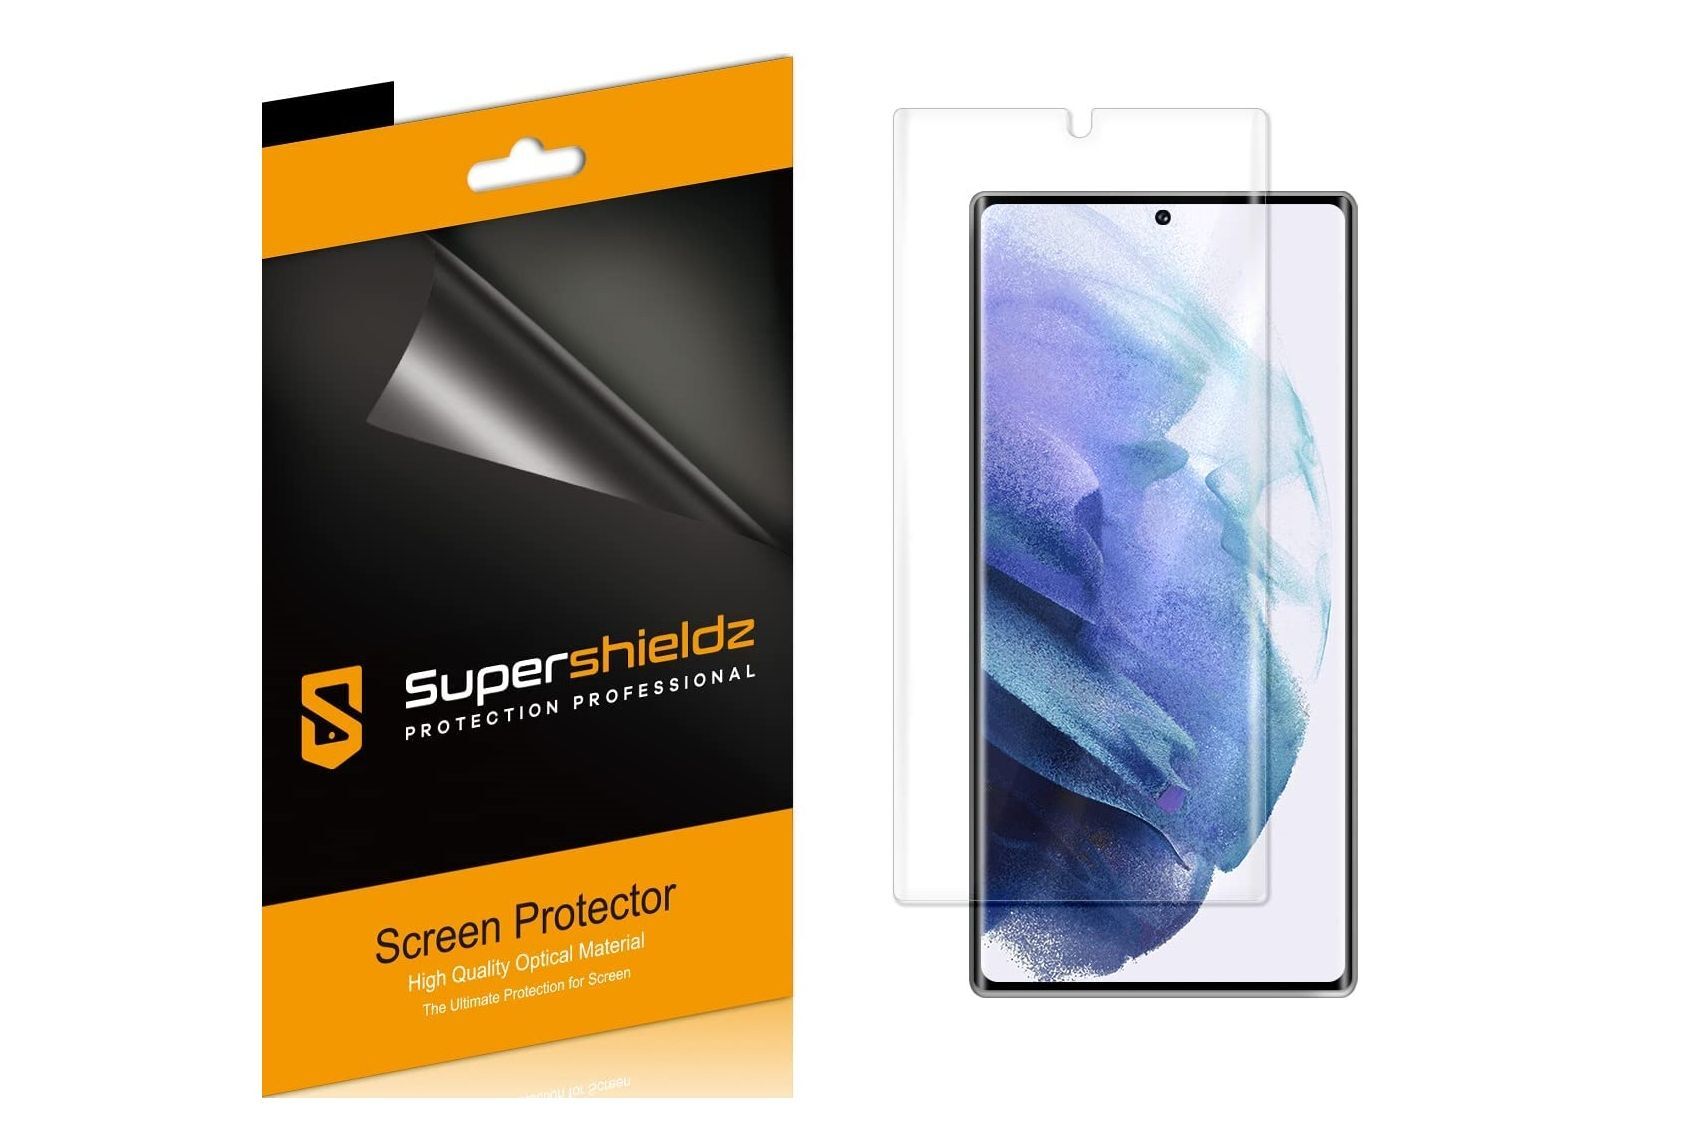 Supershieldz Samsung Galaxy S22 Ultra Screen Protector - Best Samsung Galaxy S22 Ultra screen protectors you can buy right now